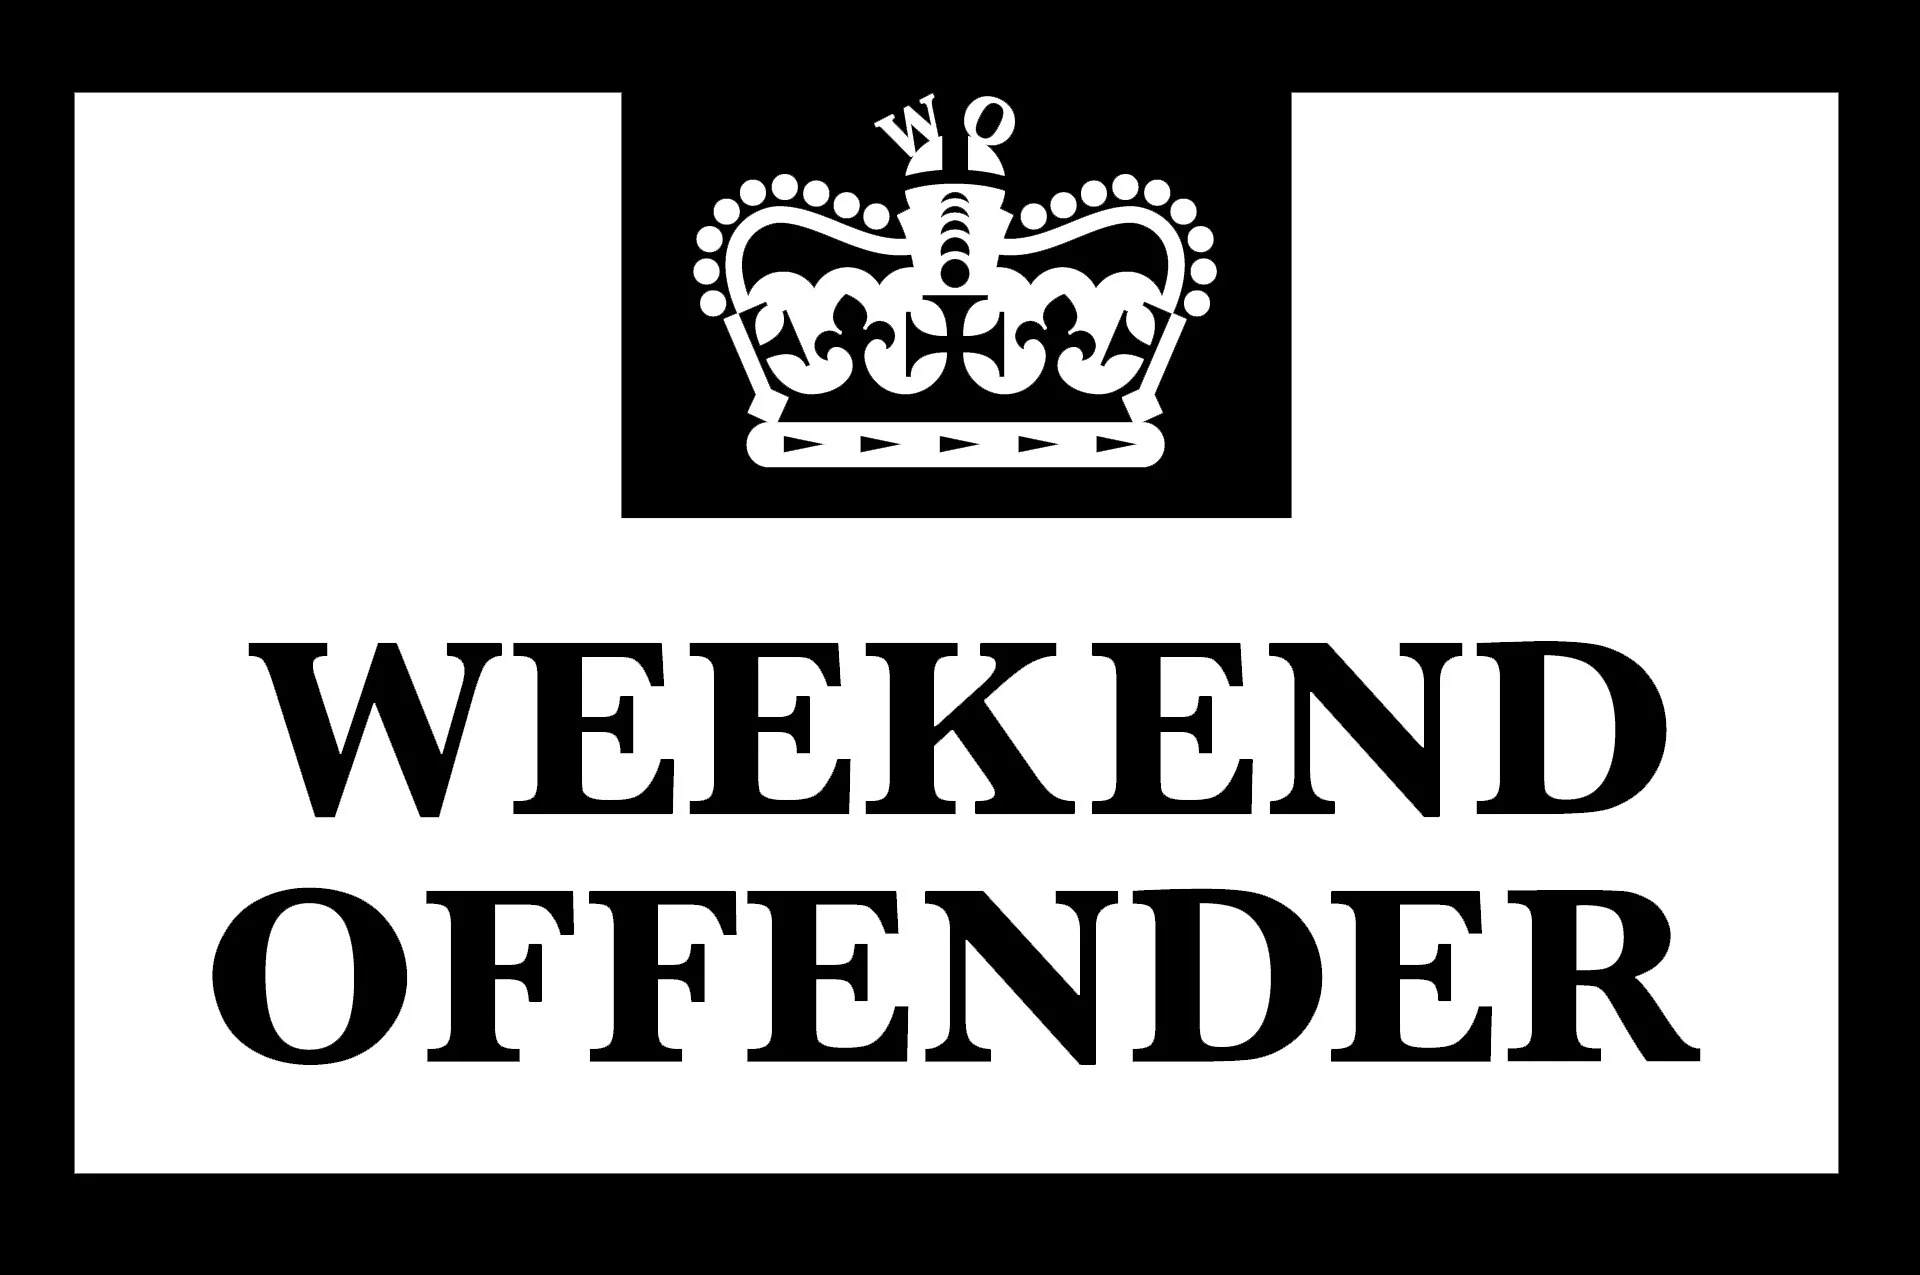 

Weekend Offender Retro Metal Tin Sign Poster Home Garage Plate Cafe Pub Motel Art Wall Decor(Visit Our Store, More Products!!!)